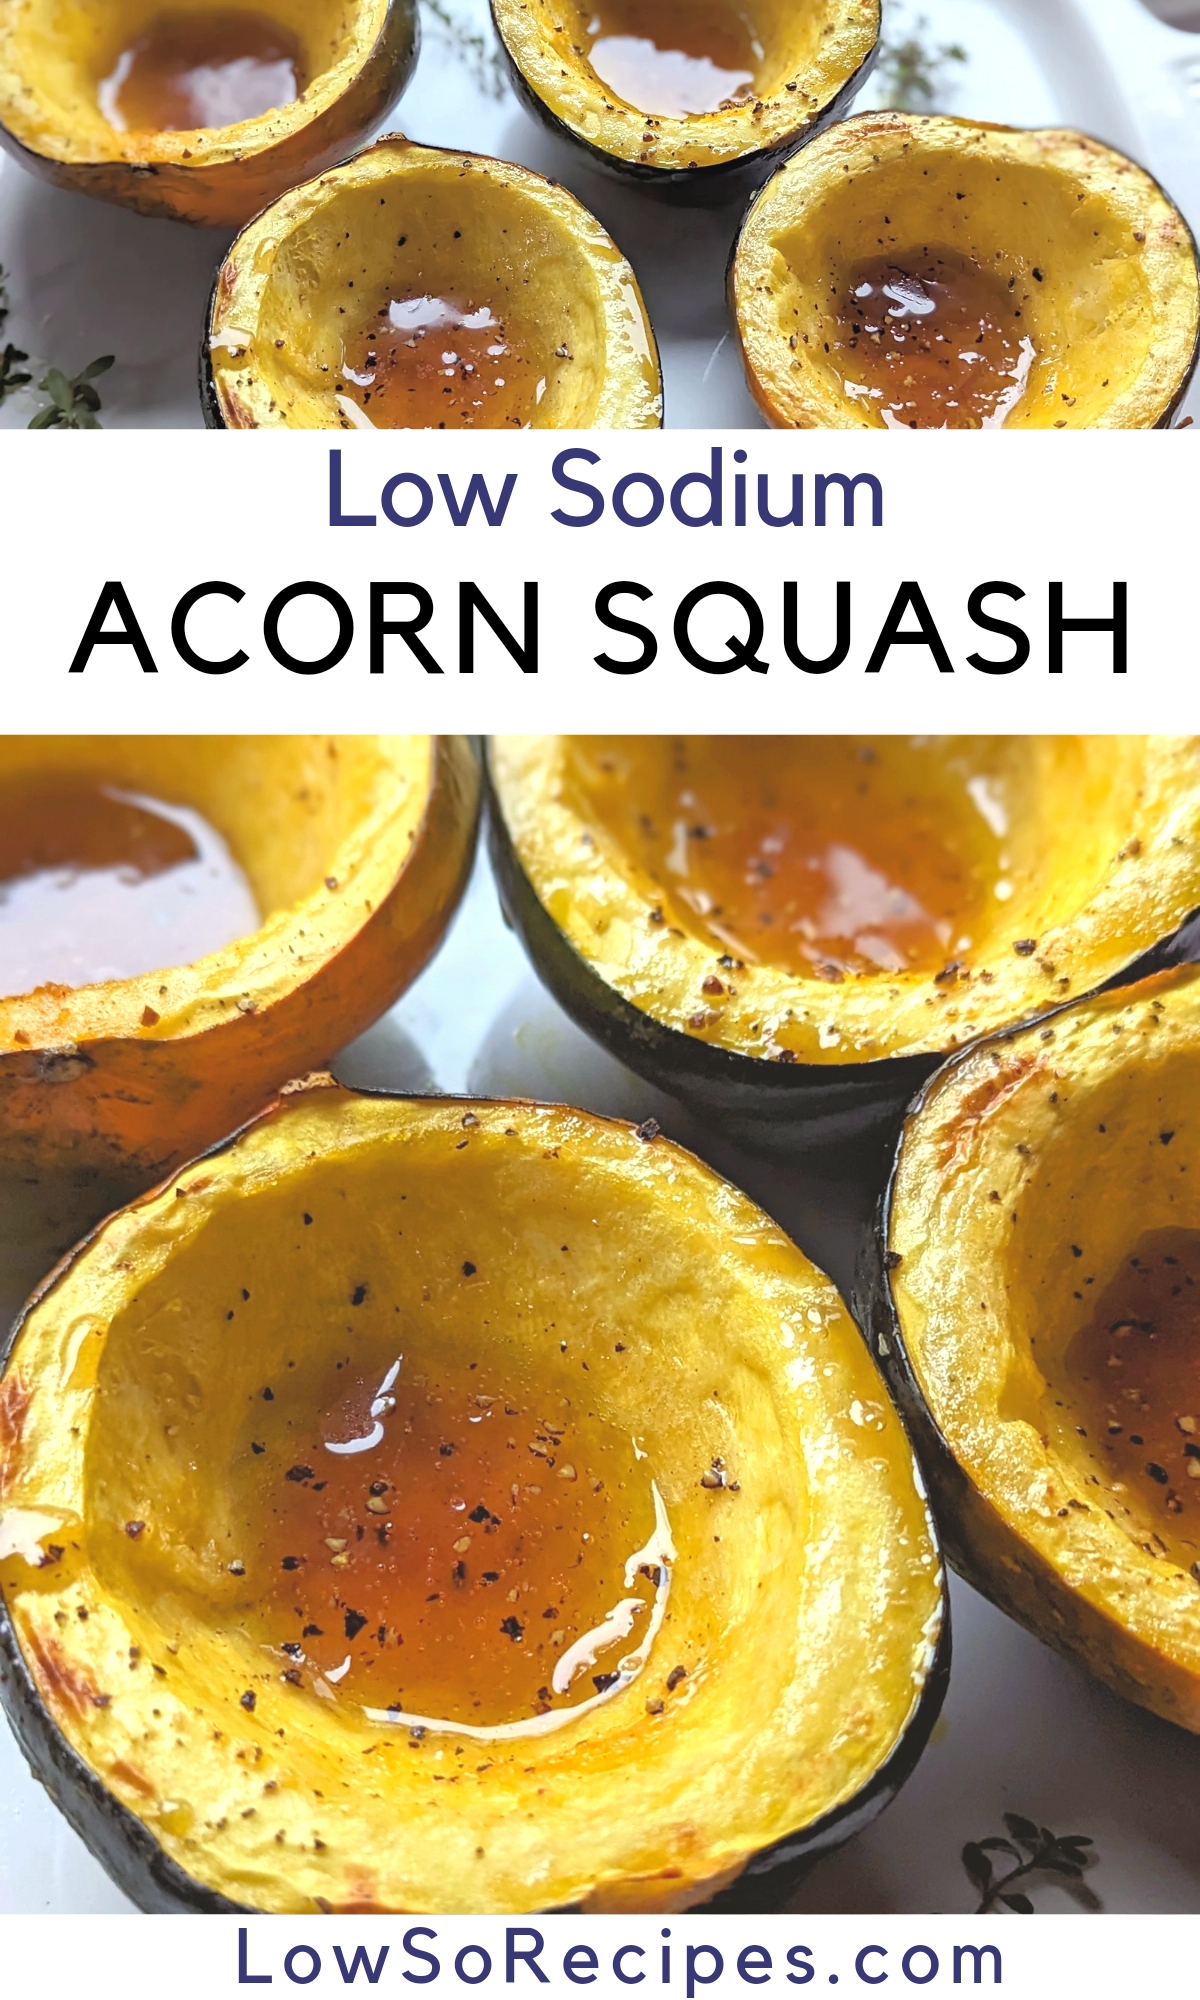 low sodium acorn squash recipe homemade roasted squash with no salt easy side dishes savory or sweet